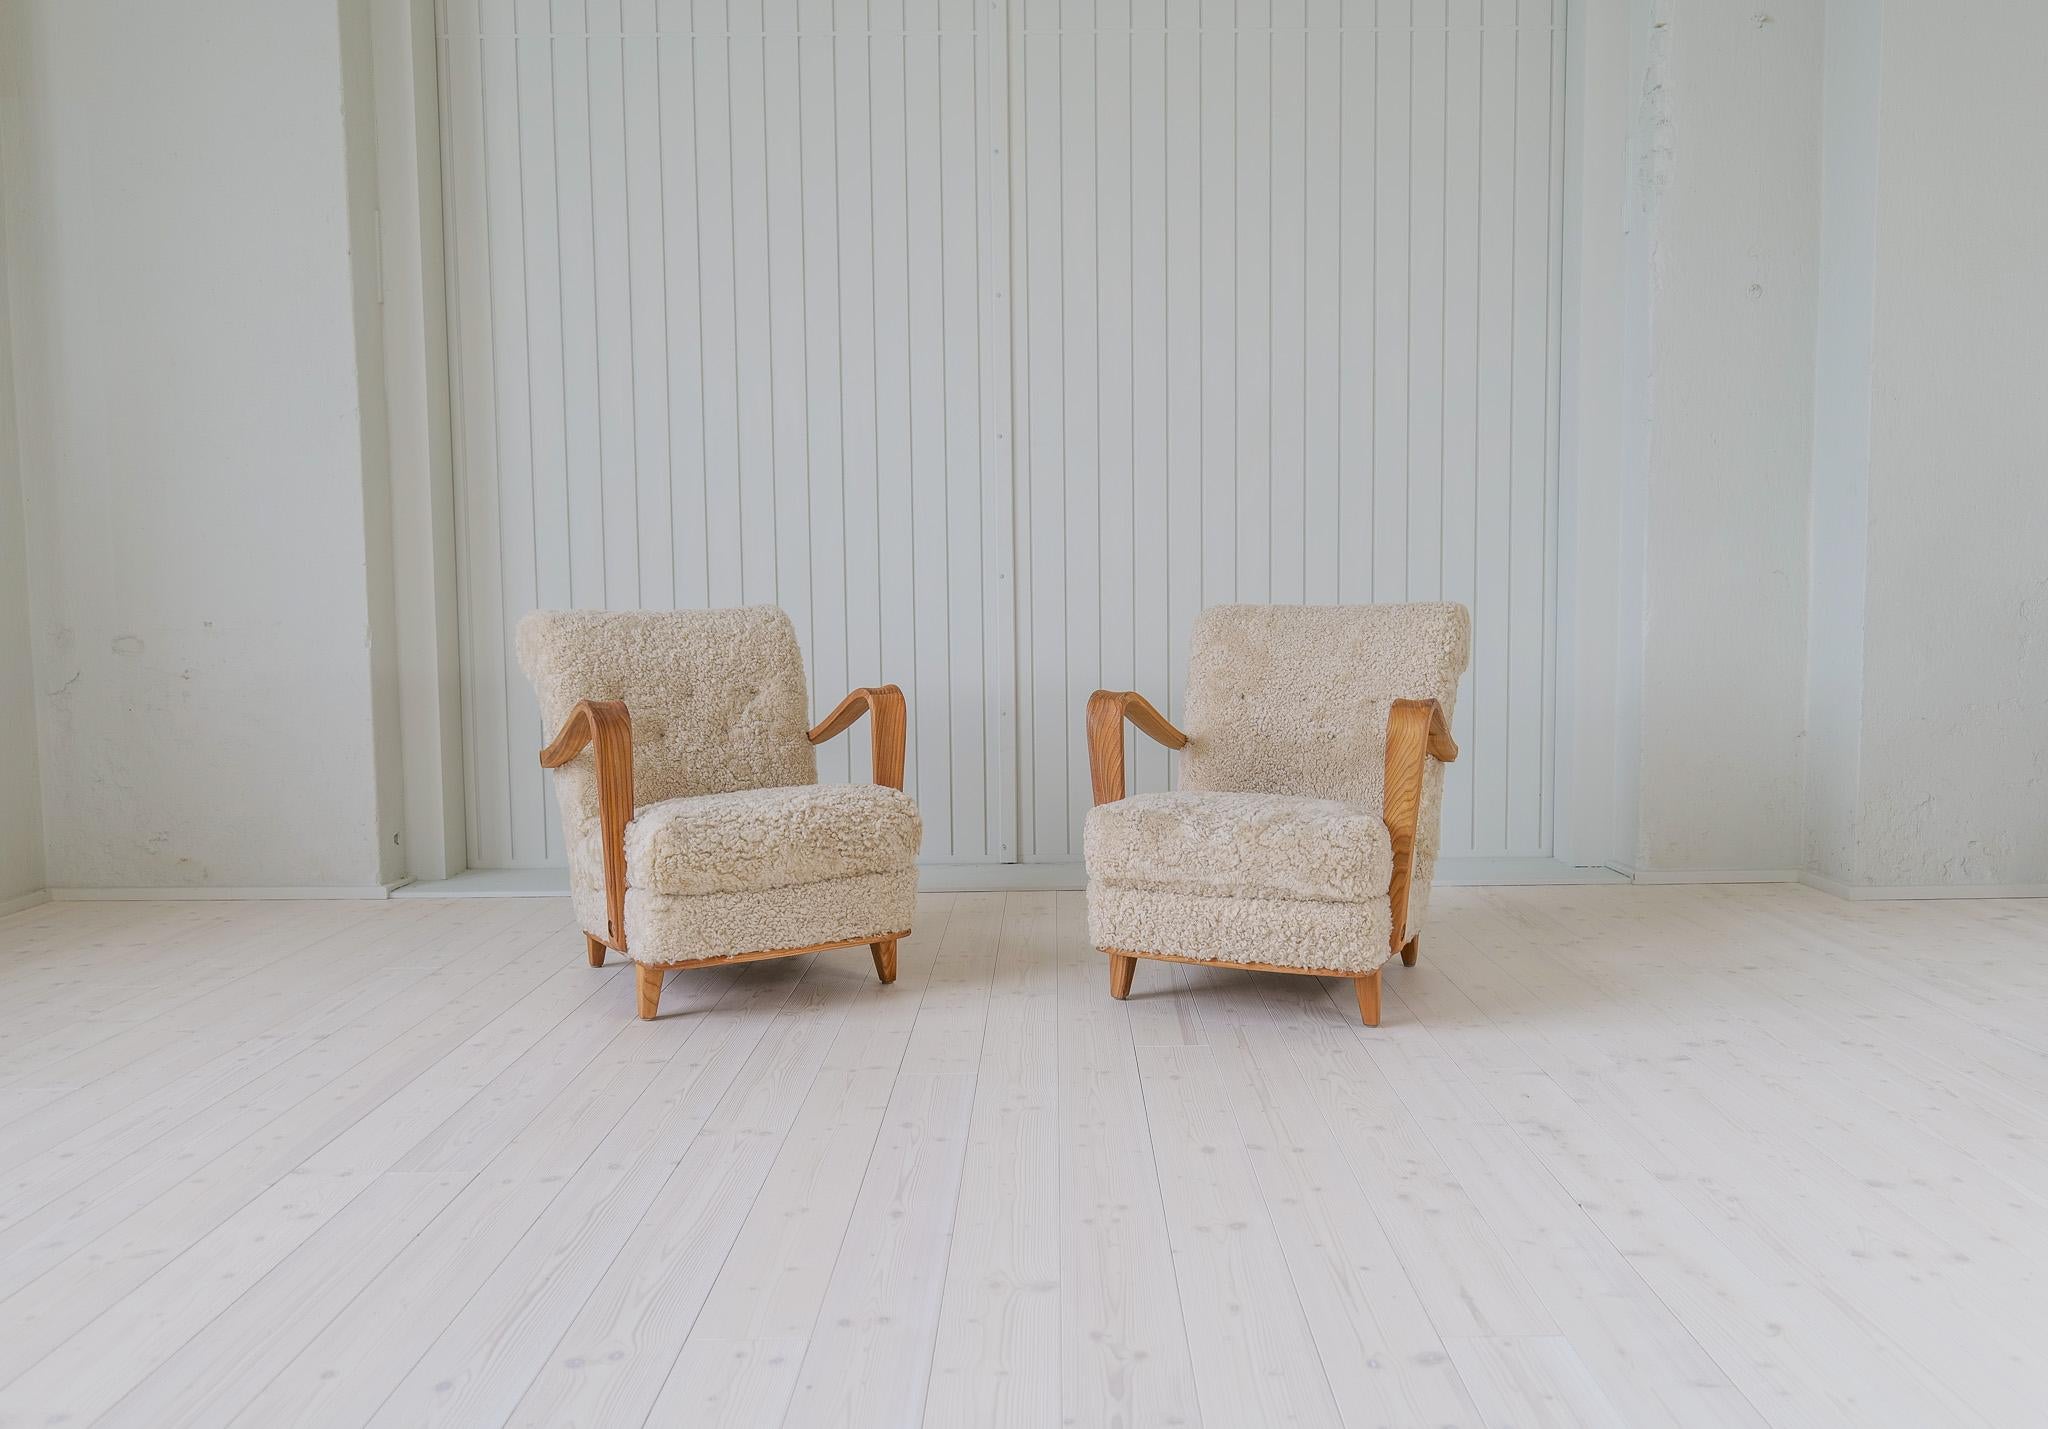 Art Deco Swedish Modern Lounge Chairs in Shearling / Sheepskin and Elm, 1940s For Sale